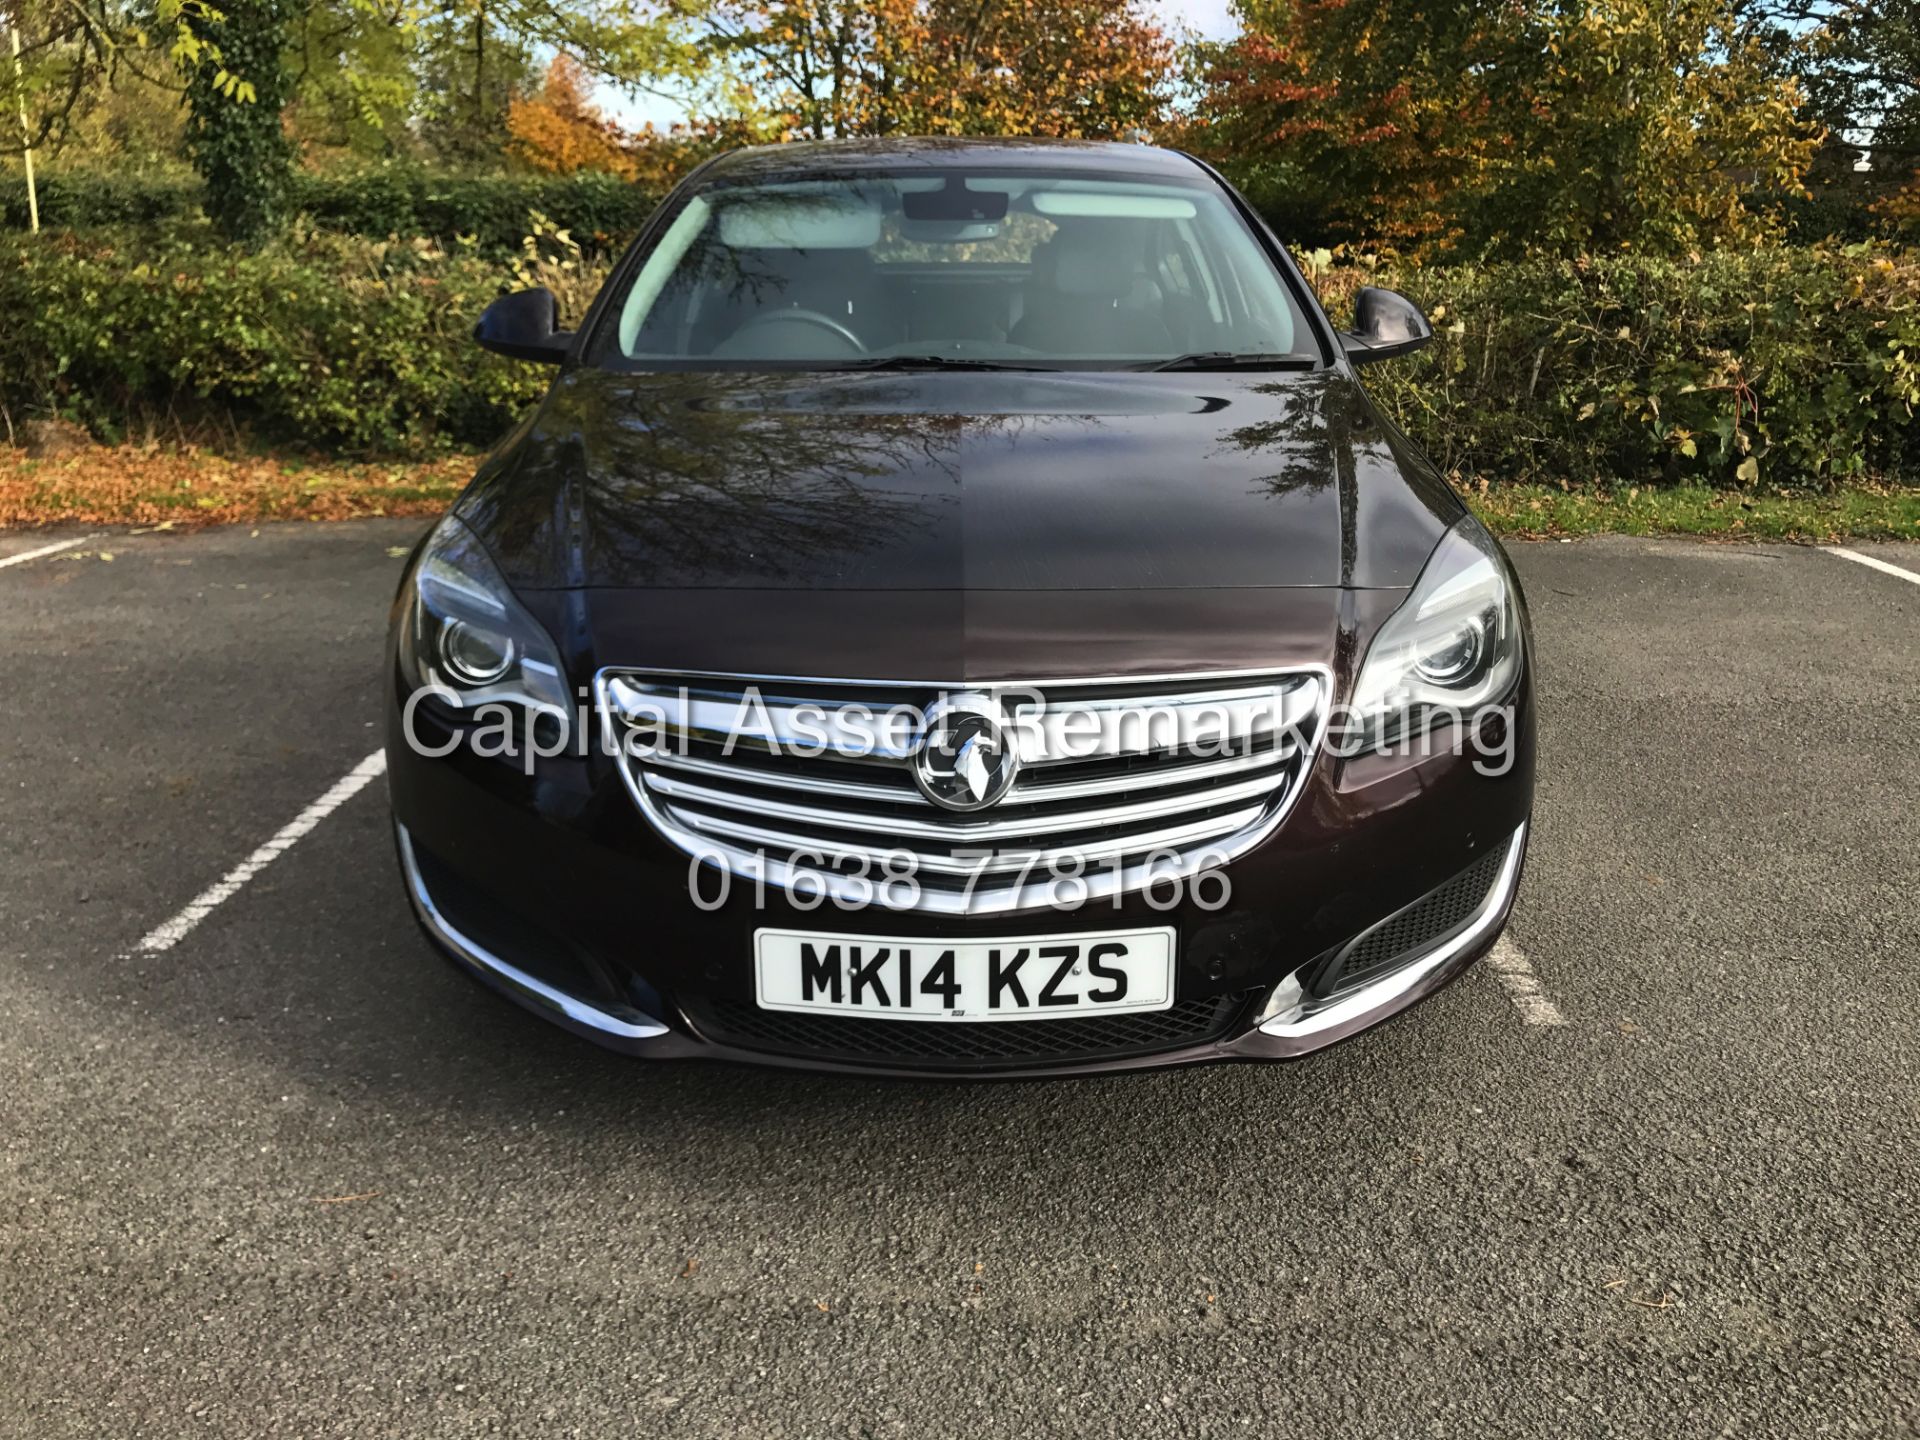 VAUXHALL INSIGNIA 2.0CDTI "SE" HATCHBACK (14 REG - NEW SHAPE) ONLY 70K MILES - 1 OWNER - WOW!! - Image 3 of 18